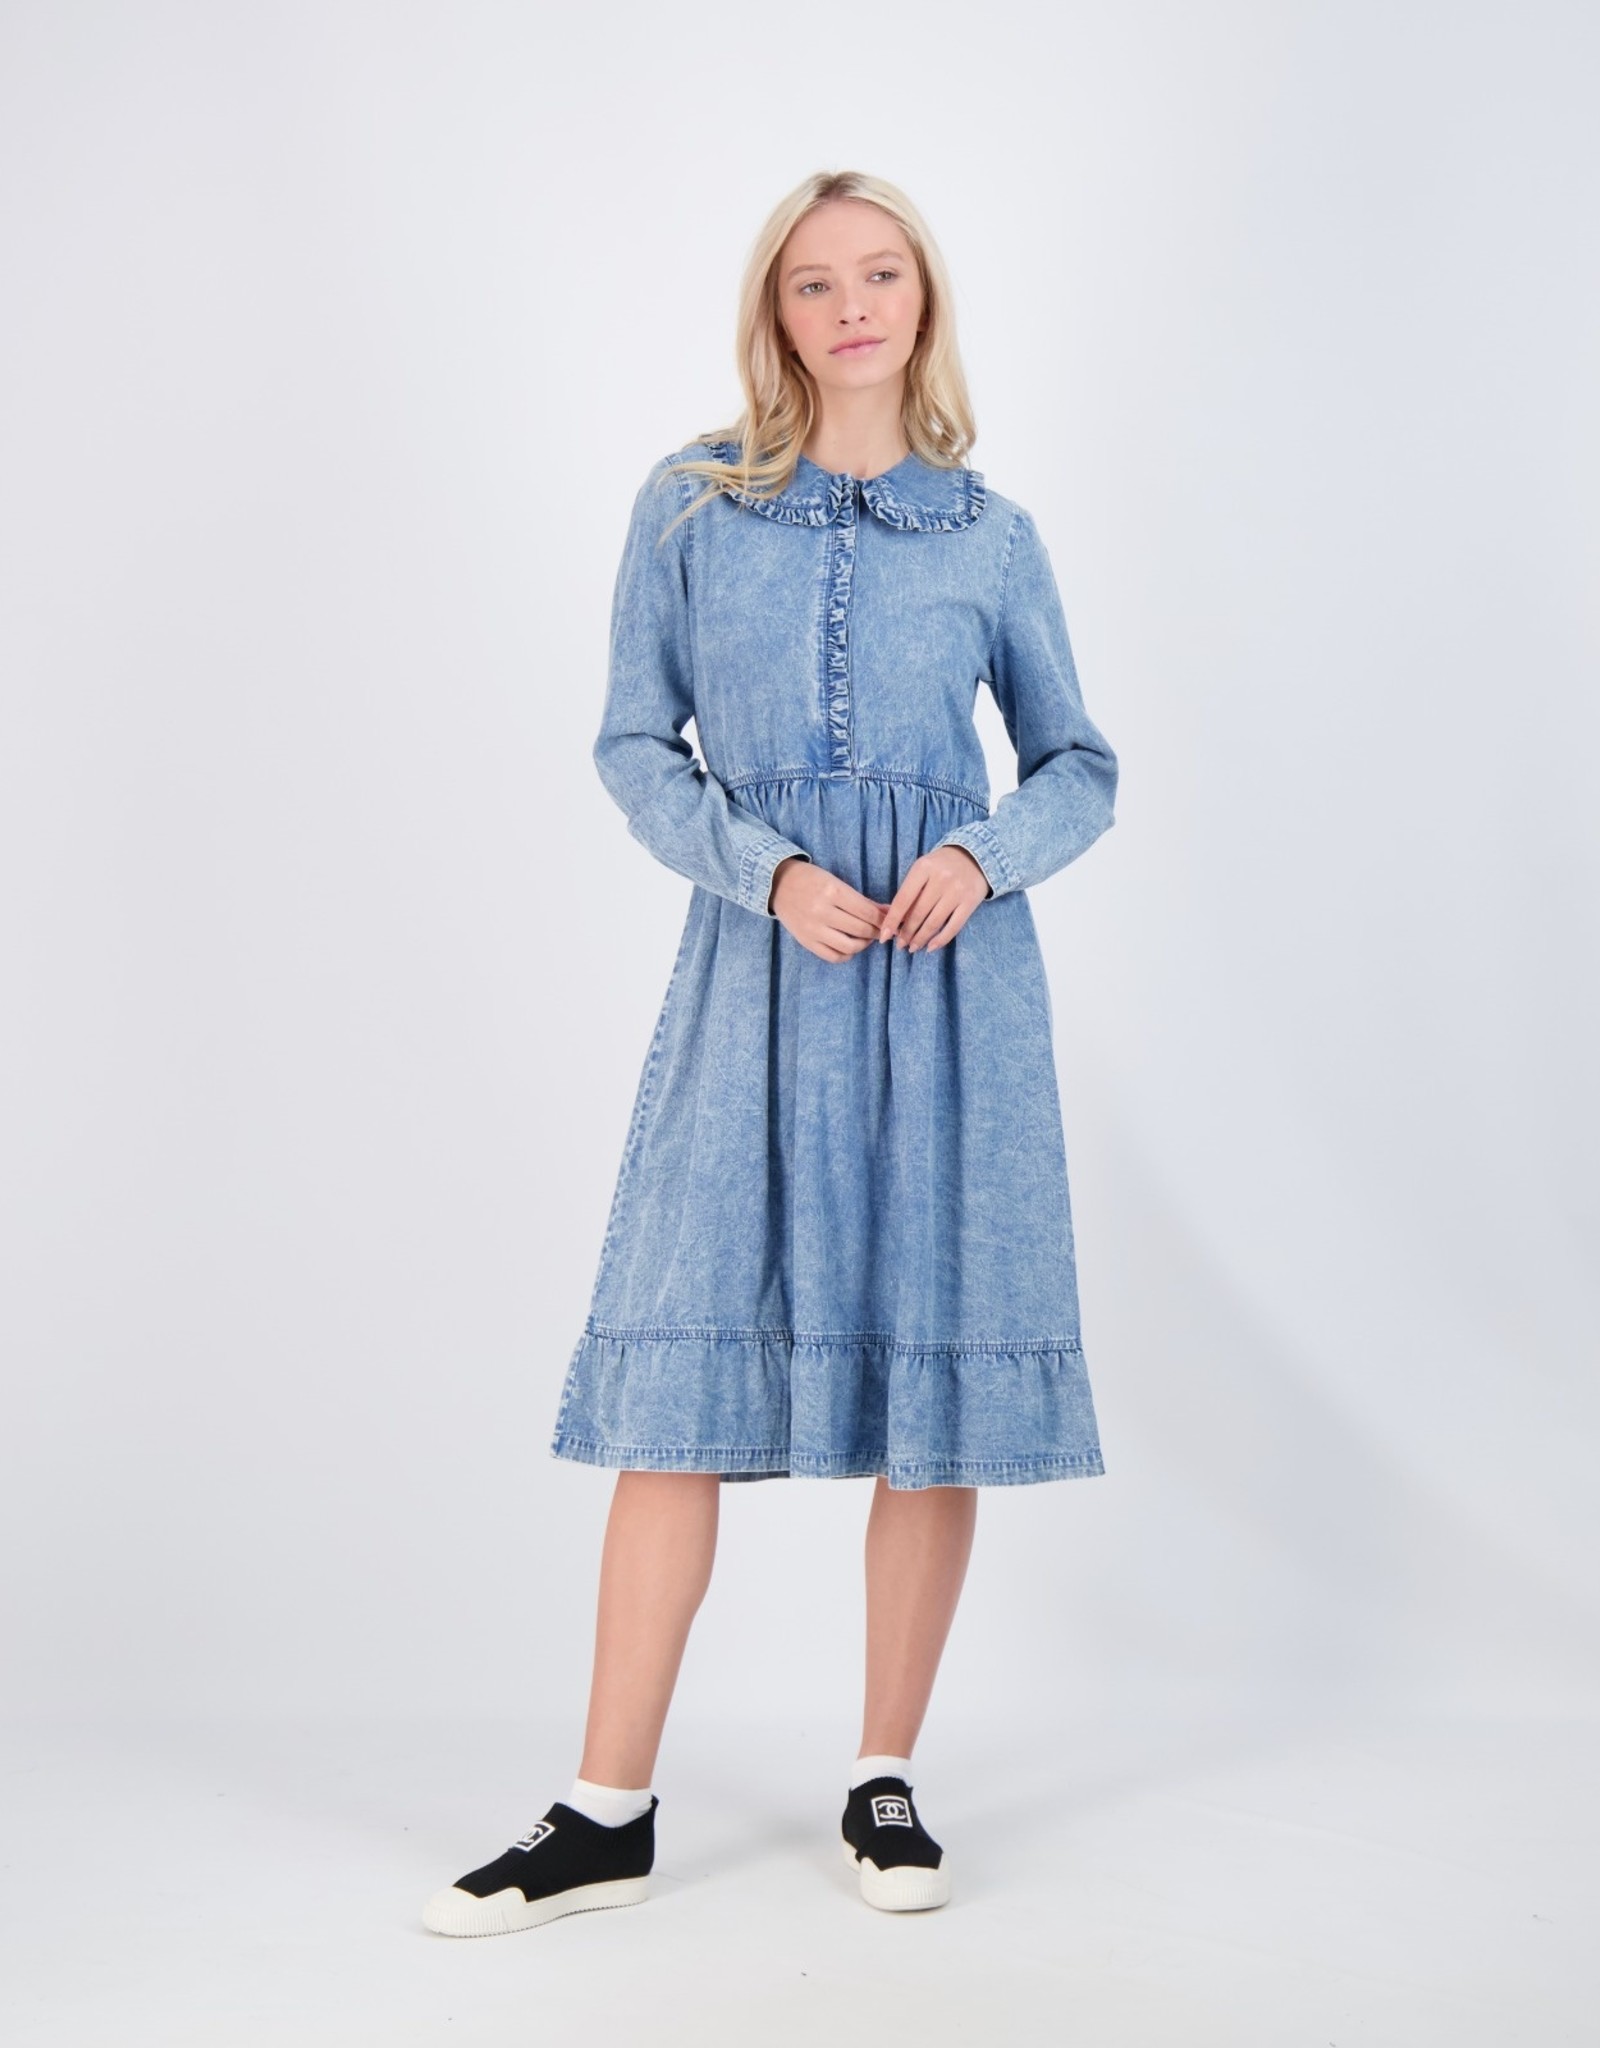 UNCLEAR Unclear Distressed Denim Dress with Collar